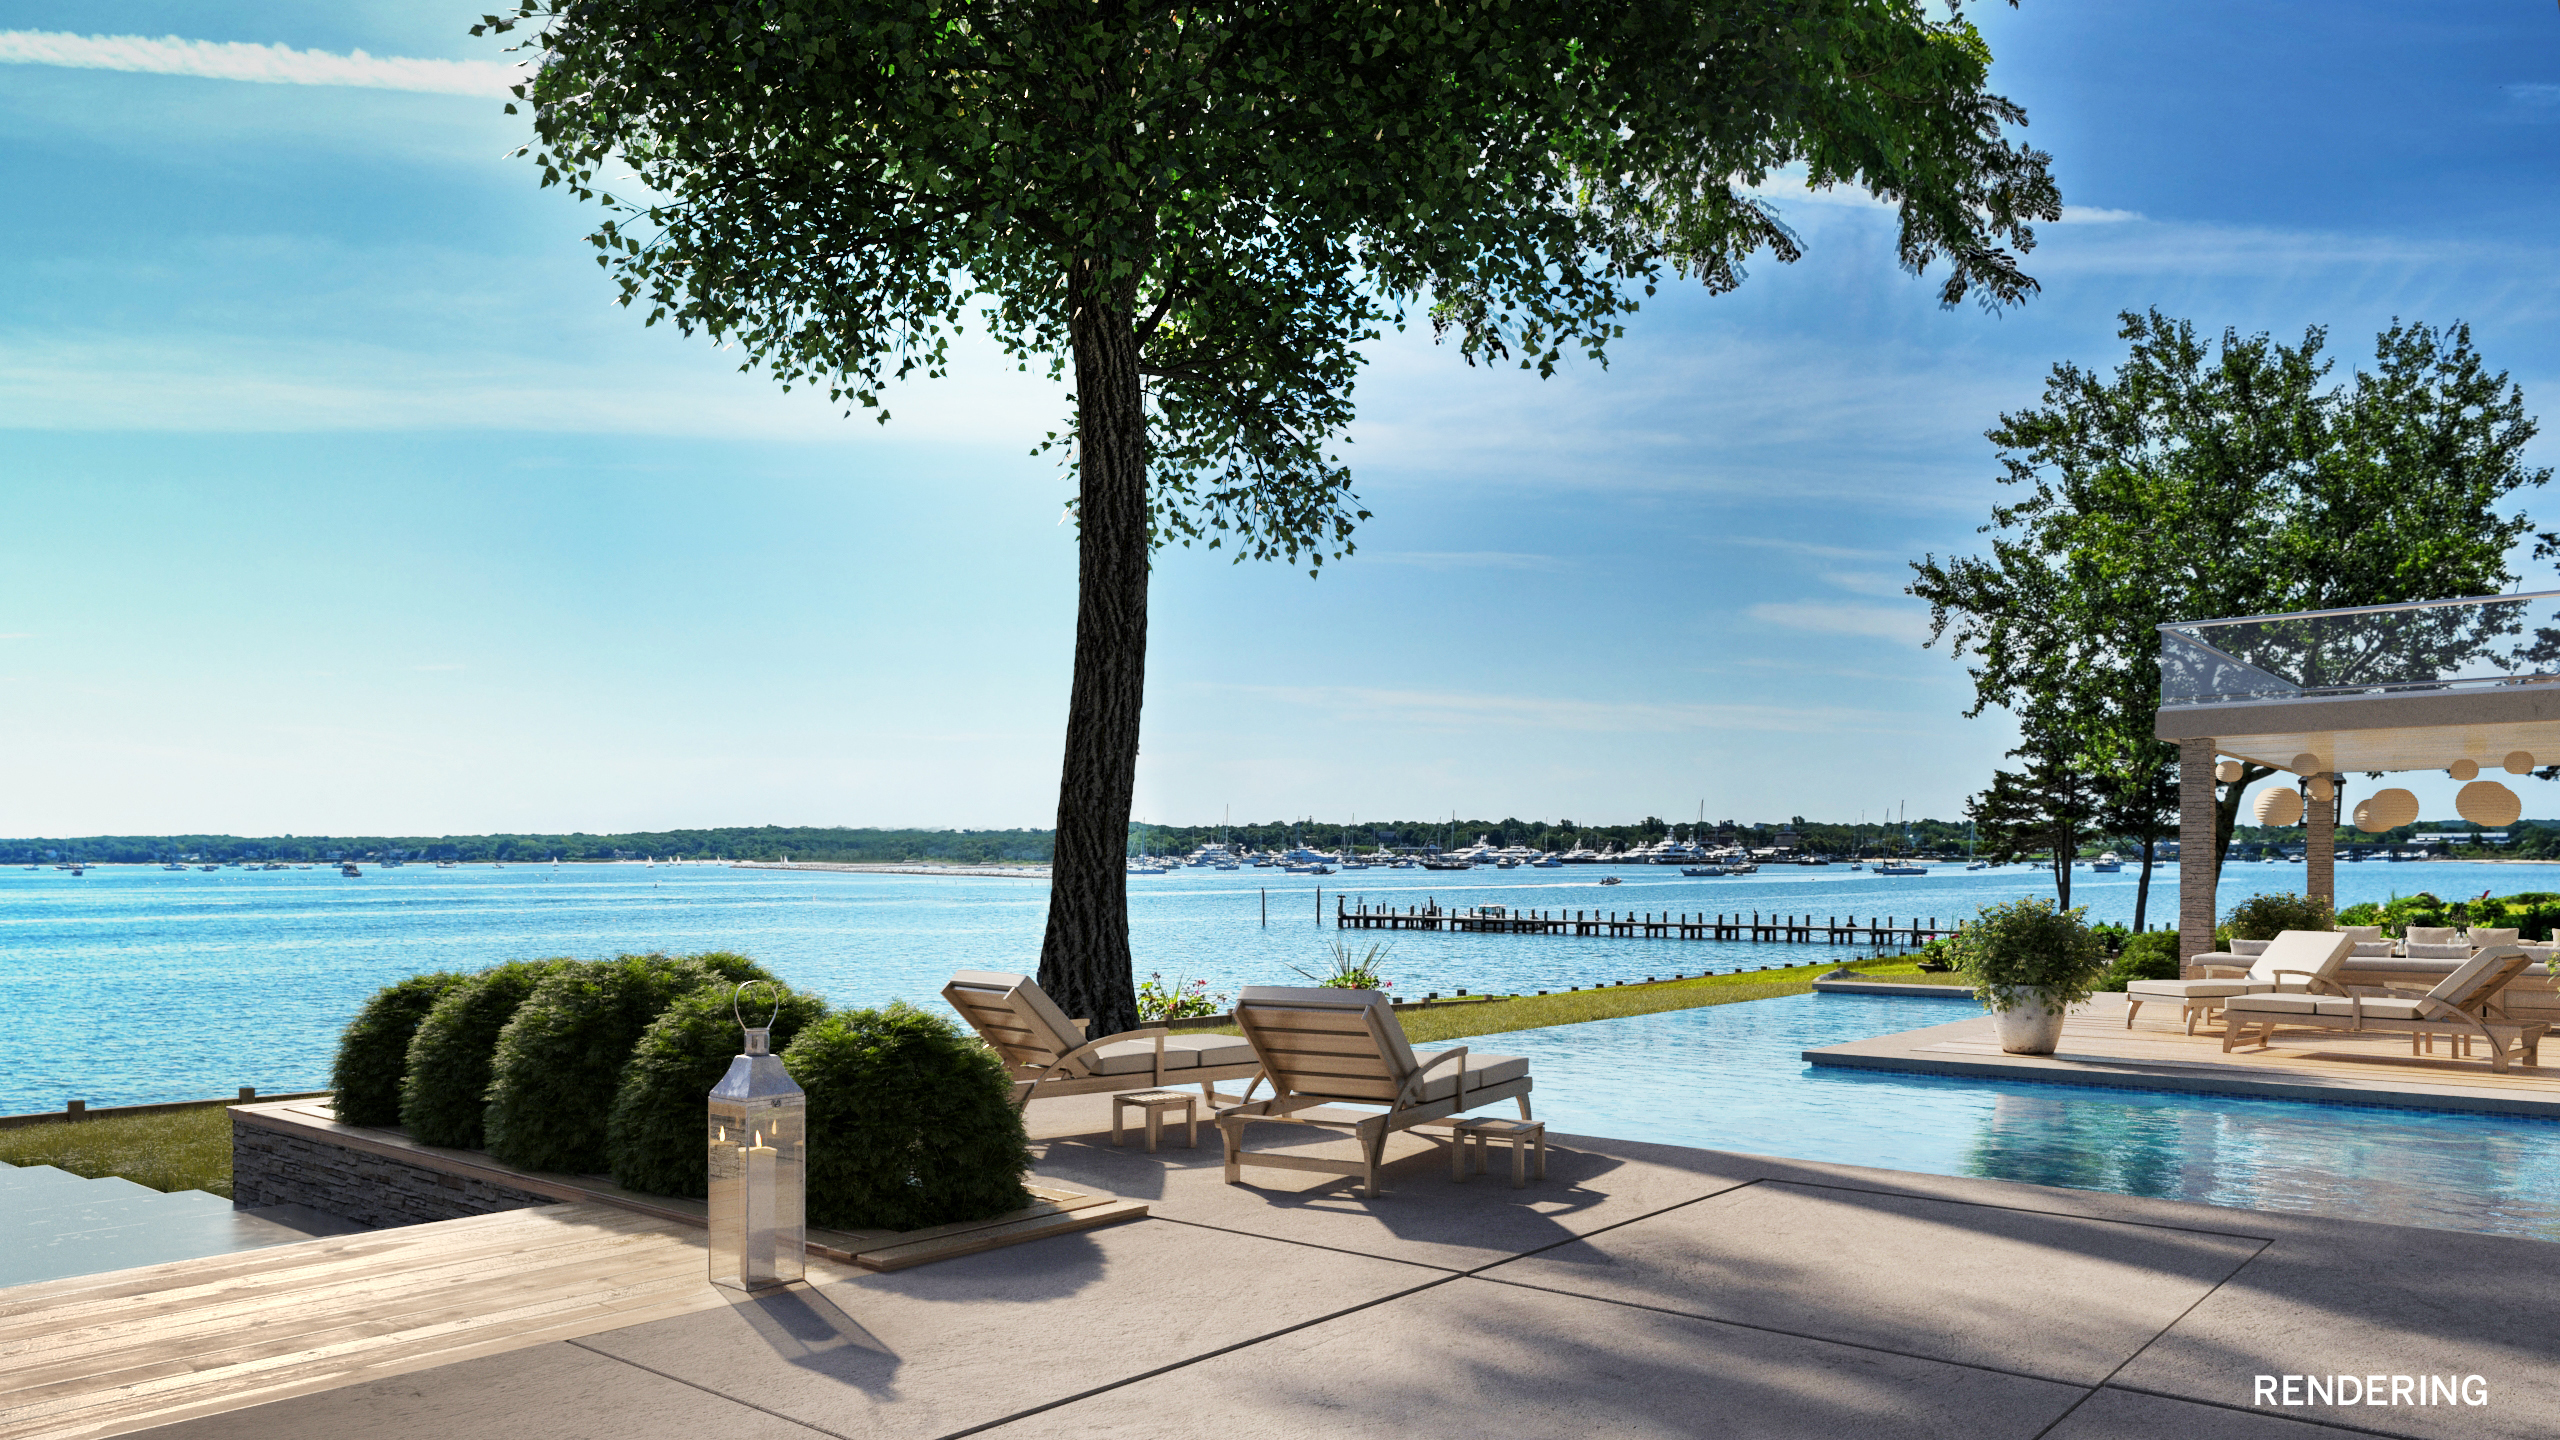 Renderings of a potentional new build at 24 East Harbor Drive.